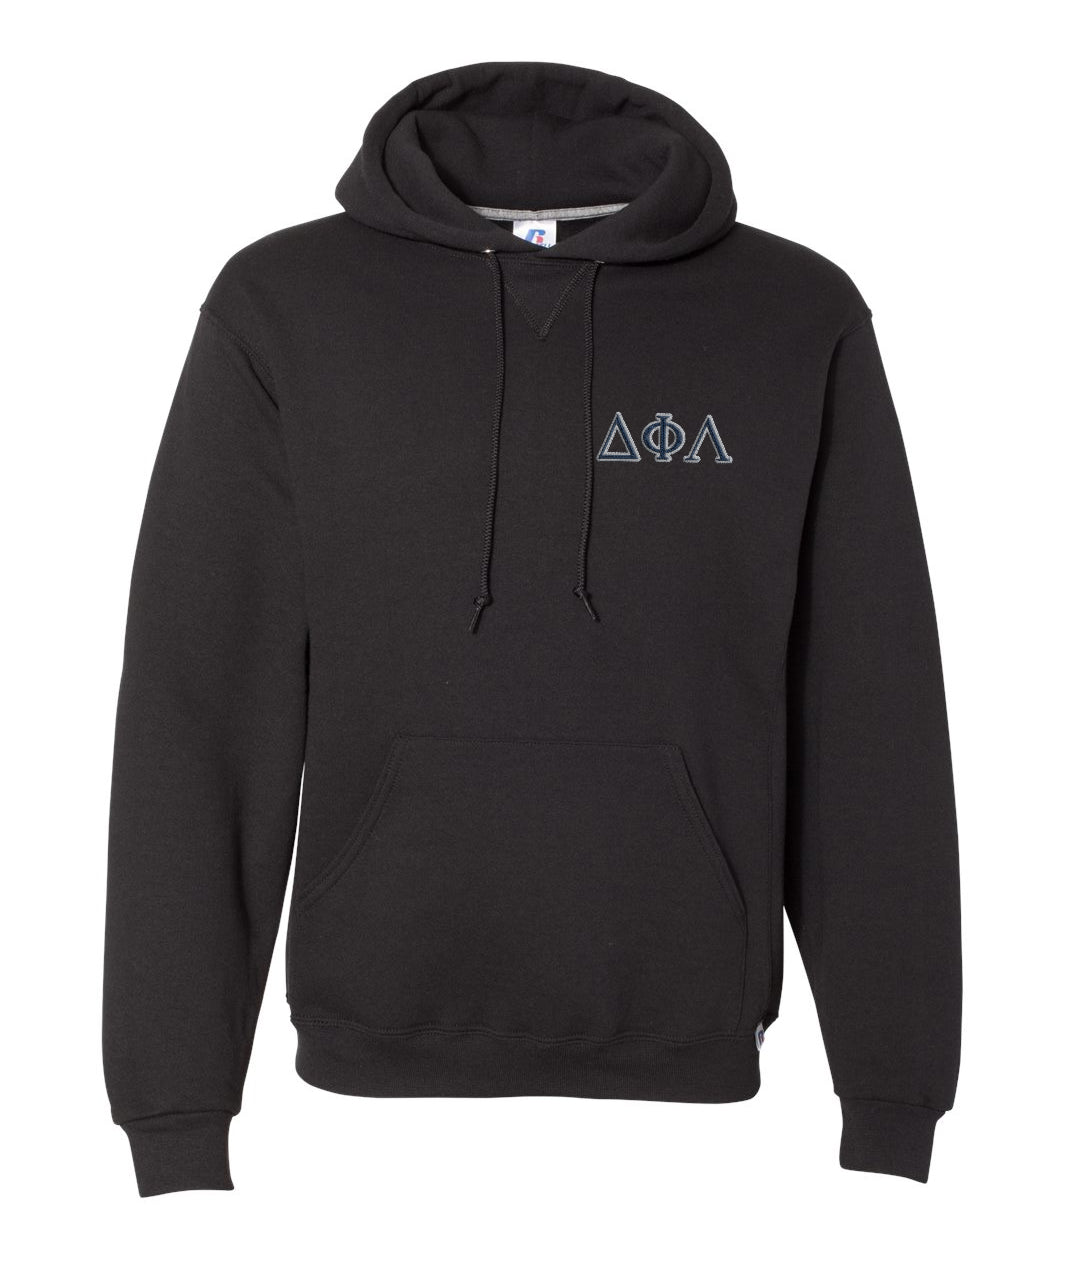 Delta Phi Lambda Embroidered Hoodie